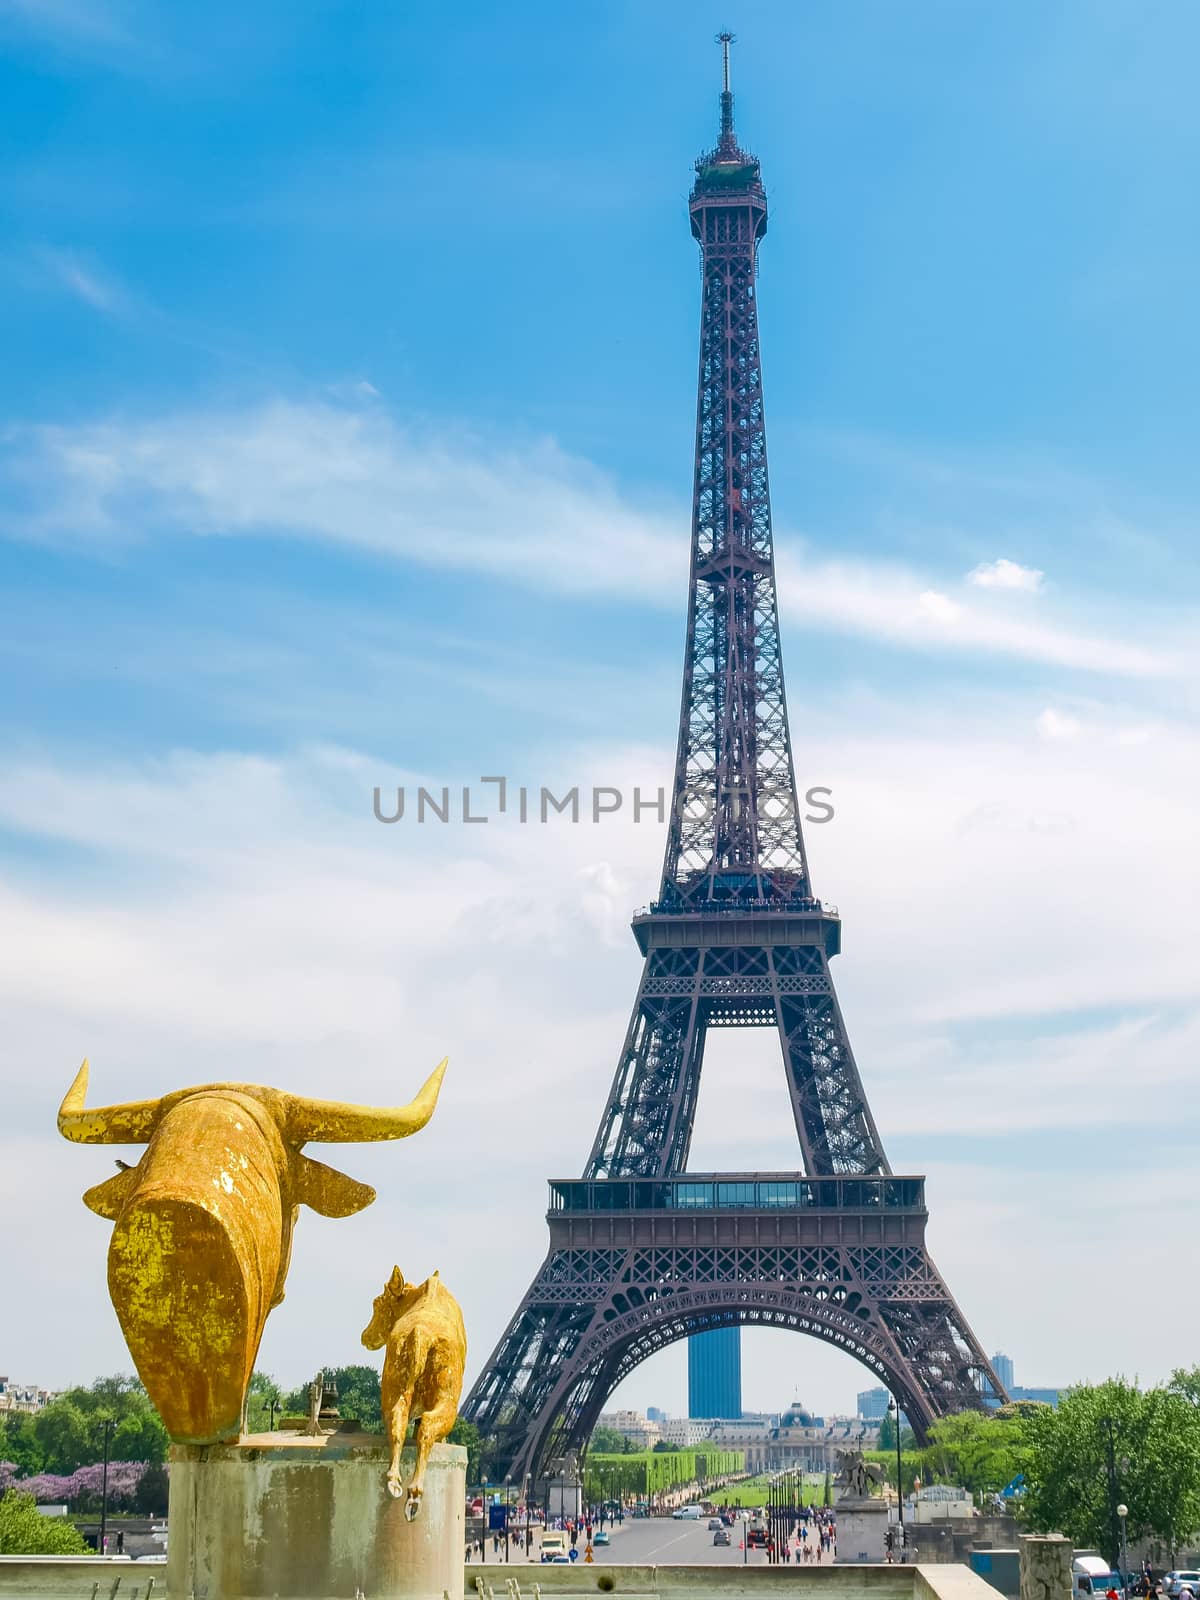 View of the Eiffel Tower from the Trocadero Square with sculptures in the foreground in Paris.
